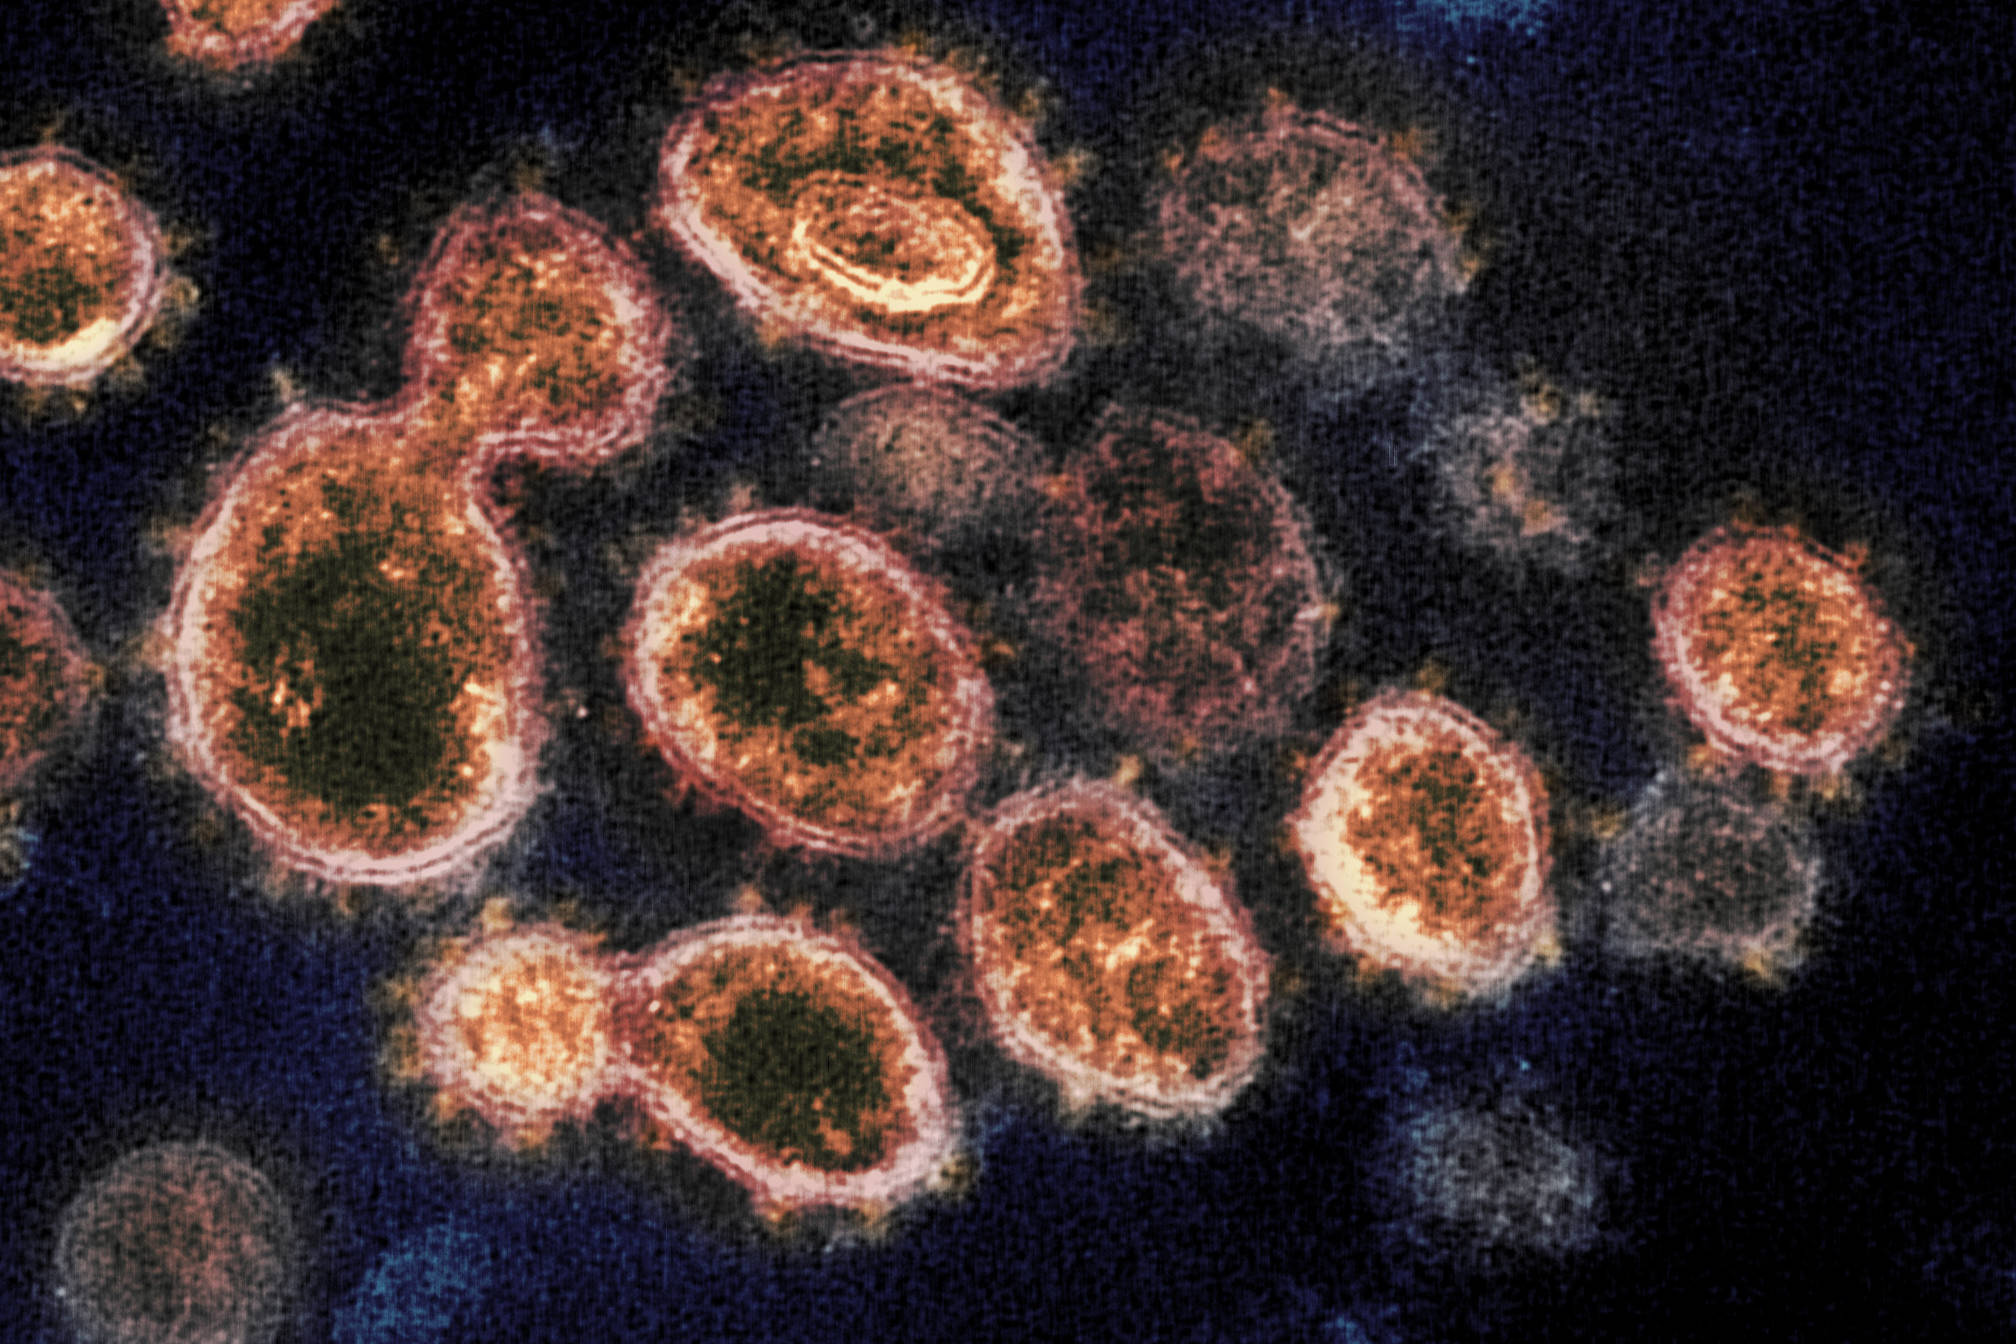 This 2020 electron microscope image provided by the National Institute of Allergy and Infectious Diseases - Rocky Mountain Laboratories shows SARS-CoV-2 virus particles which causes COVID-19, isolated from a patient in the U.S., emerging from the surface of cells cultured in a lab. On Monday, Oct. 5, 2020, the top U.S. public health agency said that coronavirus can spread greater distances through the air than 6 feet, particularly in poorly ventilated and enclosed spaces. But agency officials continued to say such spread is uncommon, and current social distancing guidelines still make sense. (NIAID-RML via AP)